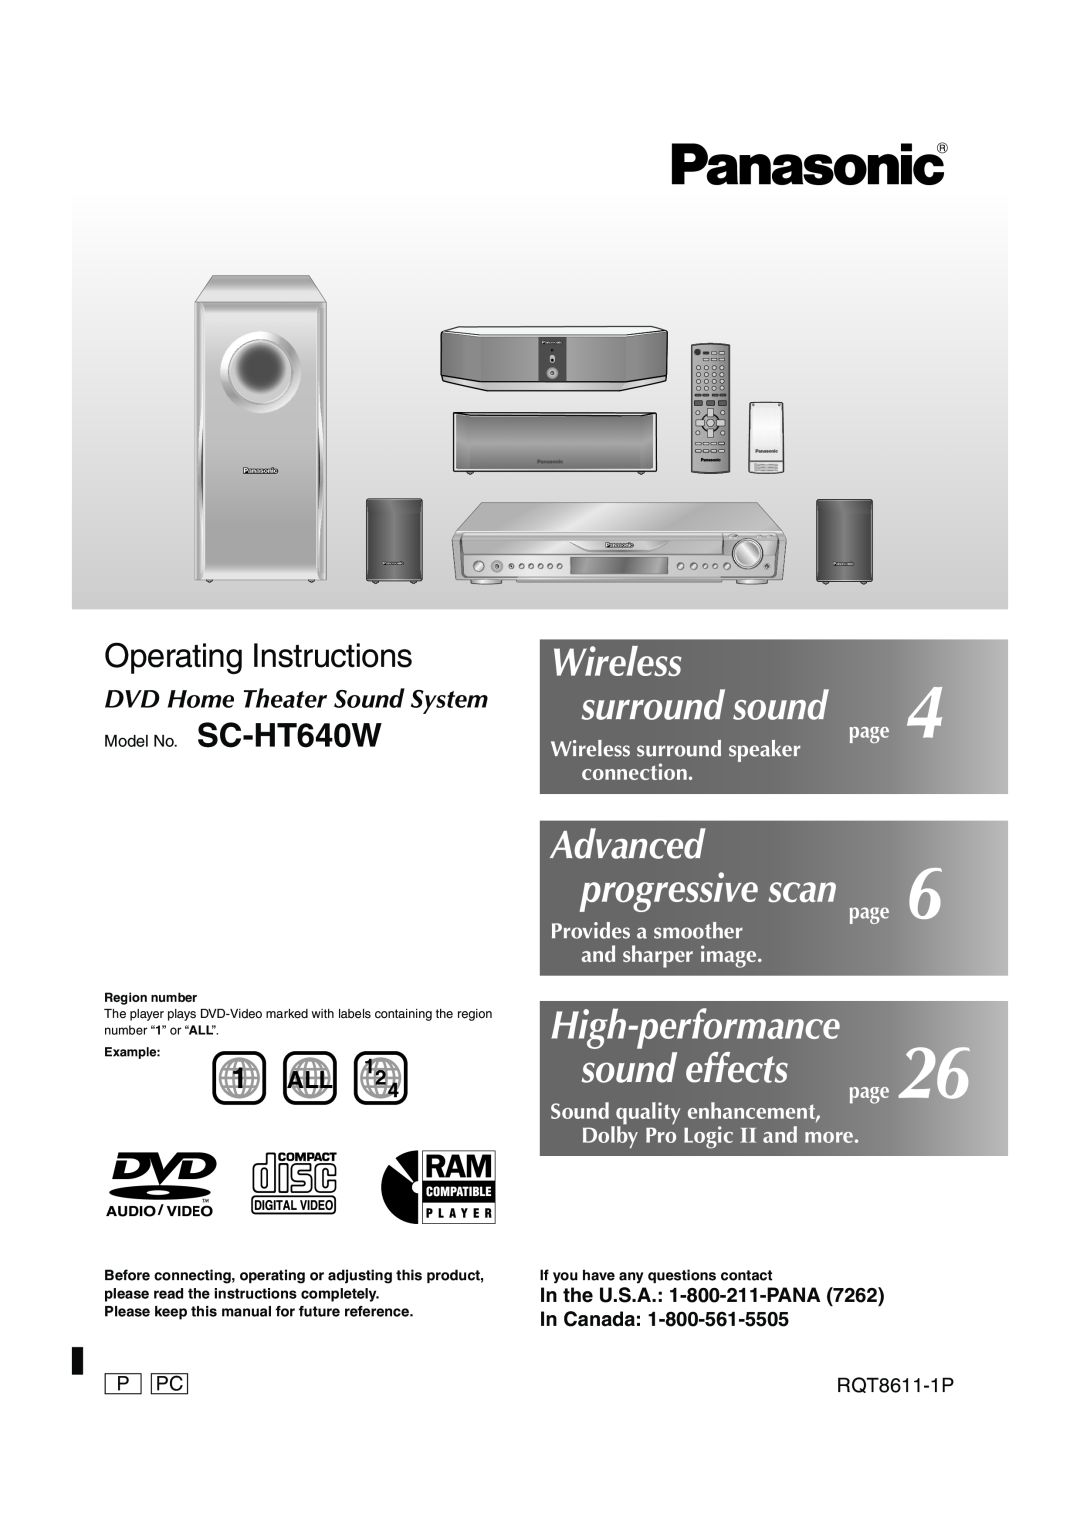 Panasonic SC-HT640W manual DVD Home Theater Sound System, page Wireless surround speaker connection, 1ALL, P Pc 